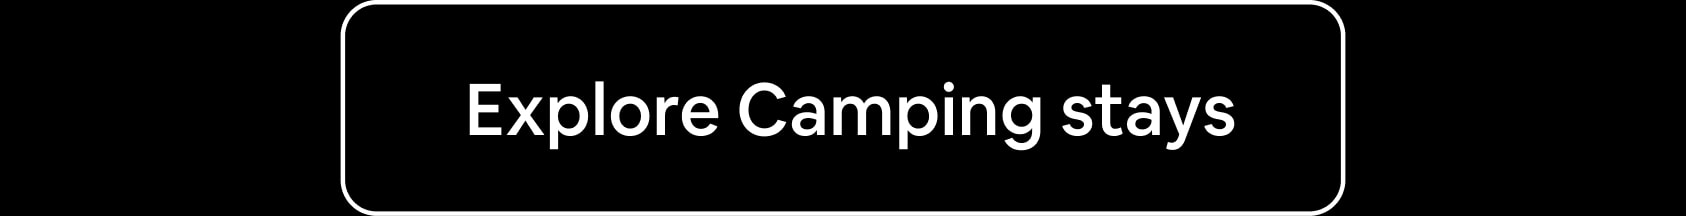 Explore Camping stays